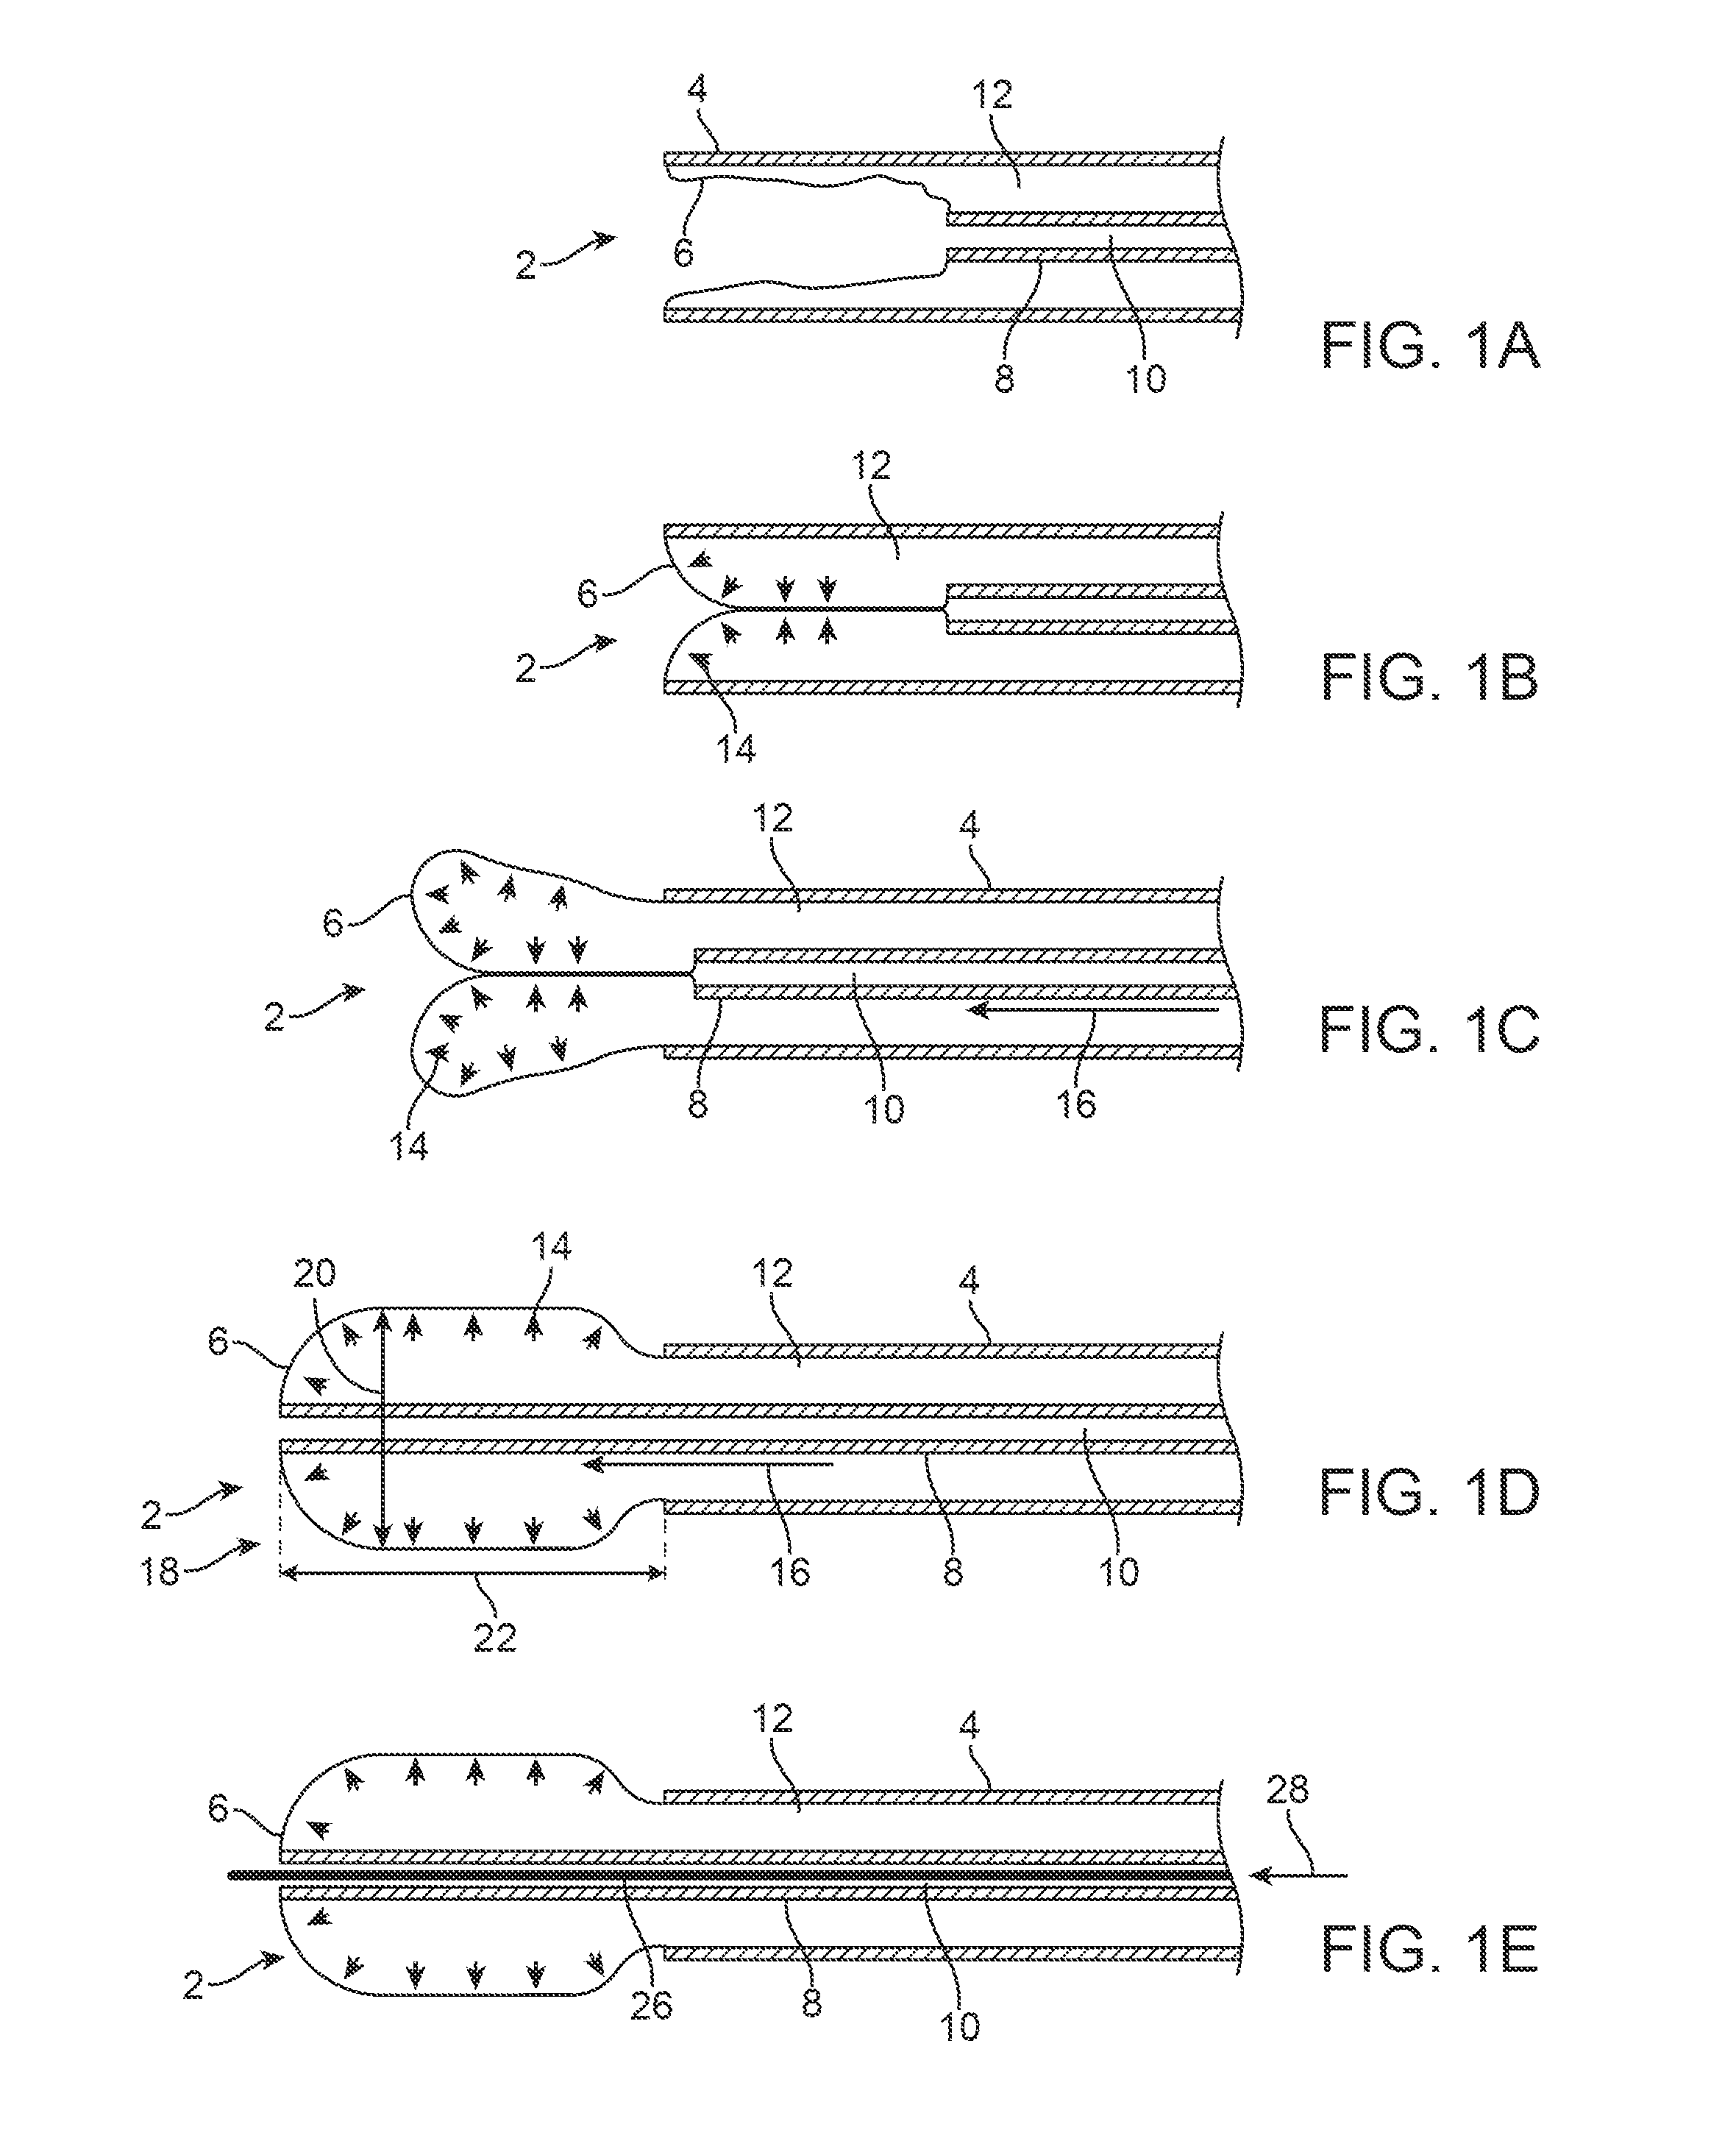 Apparatus and methods for accessing and sealing bodily vessels and cavities